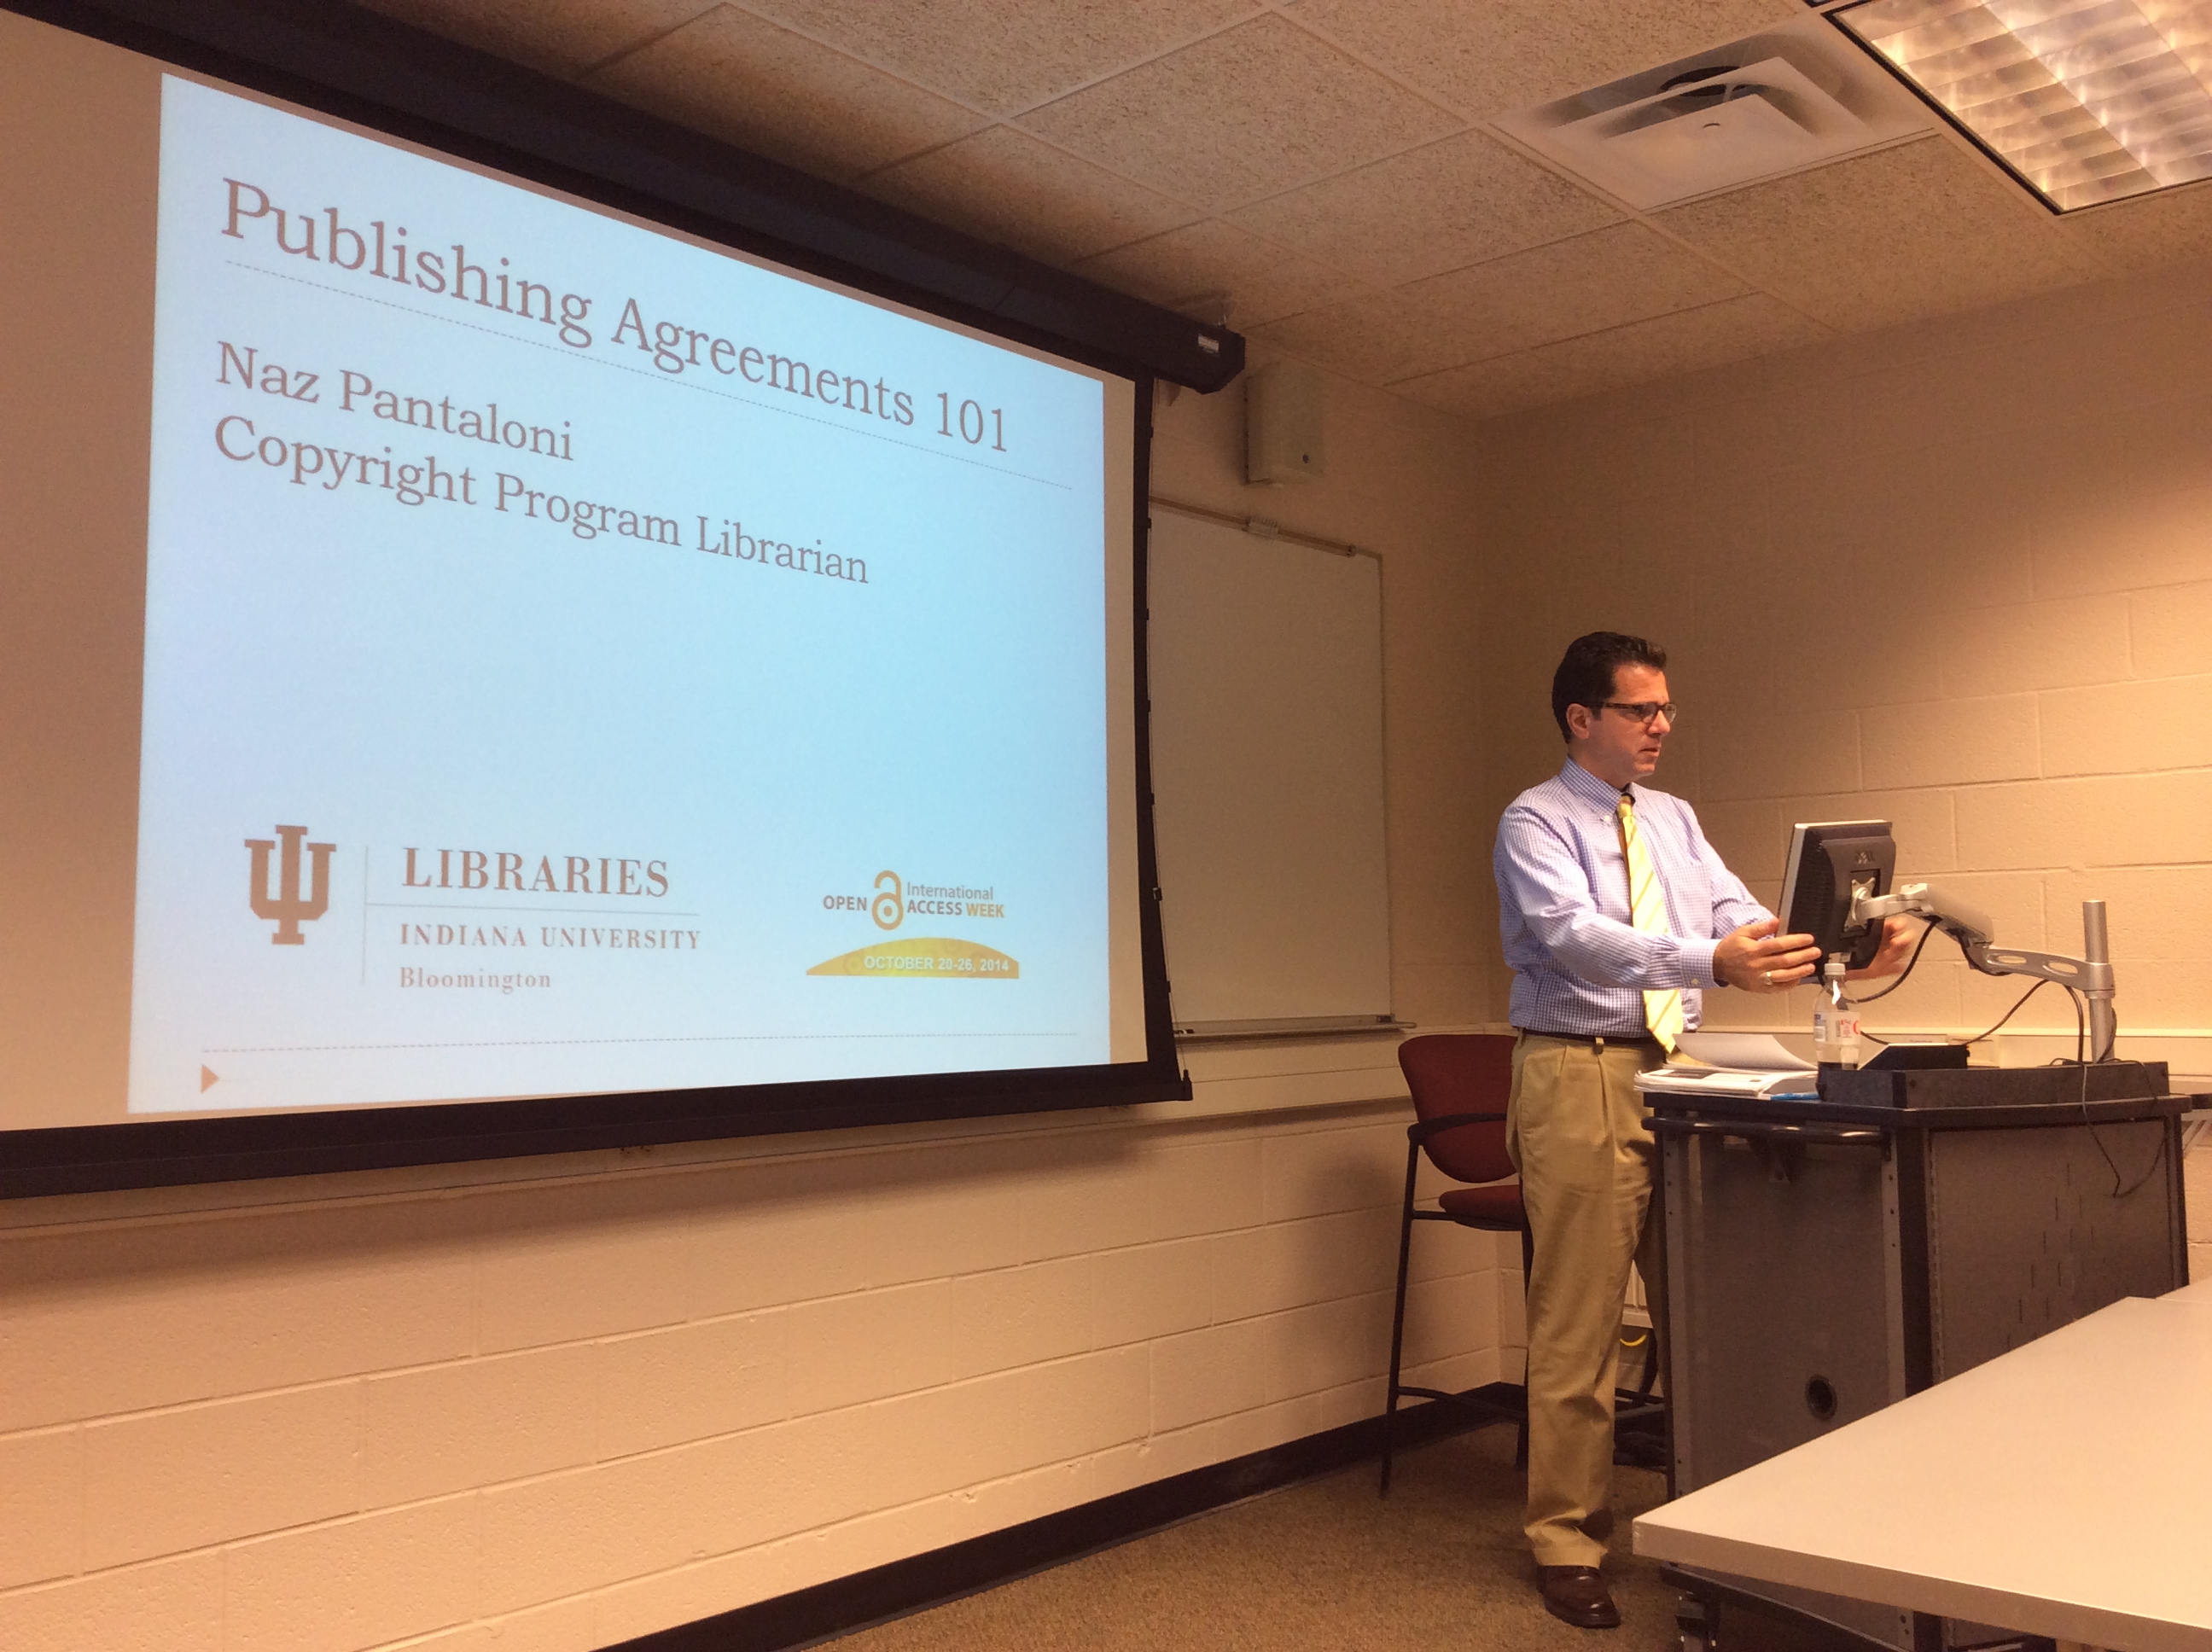 Naz Pantaloni gears up for his presentation on journal publishing agreements.